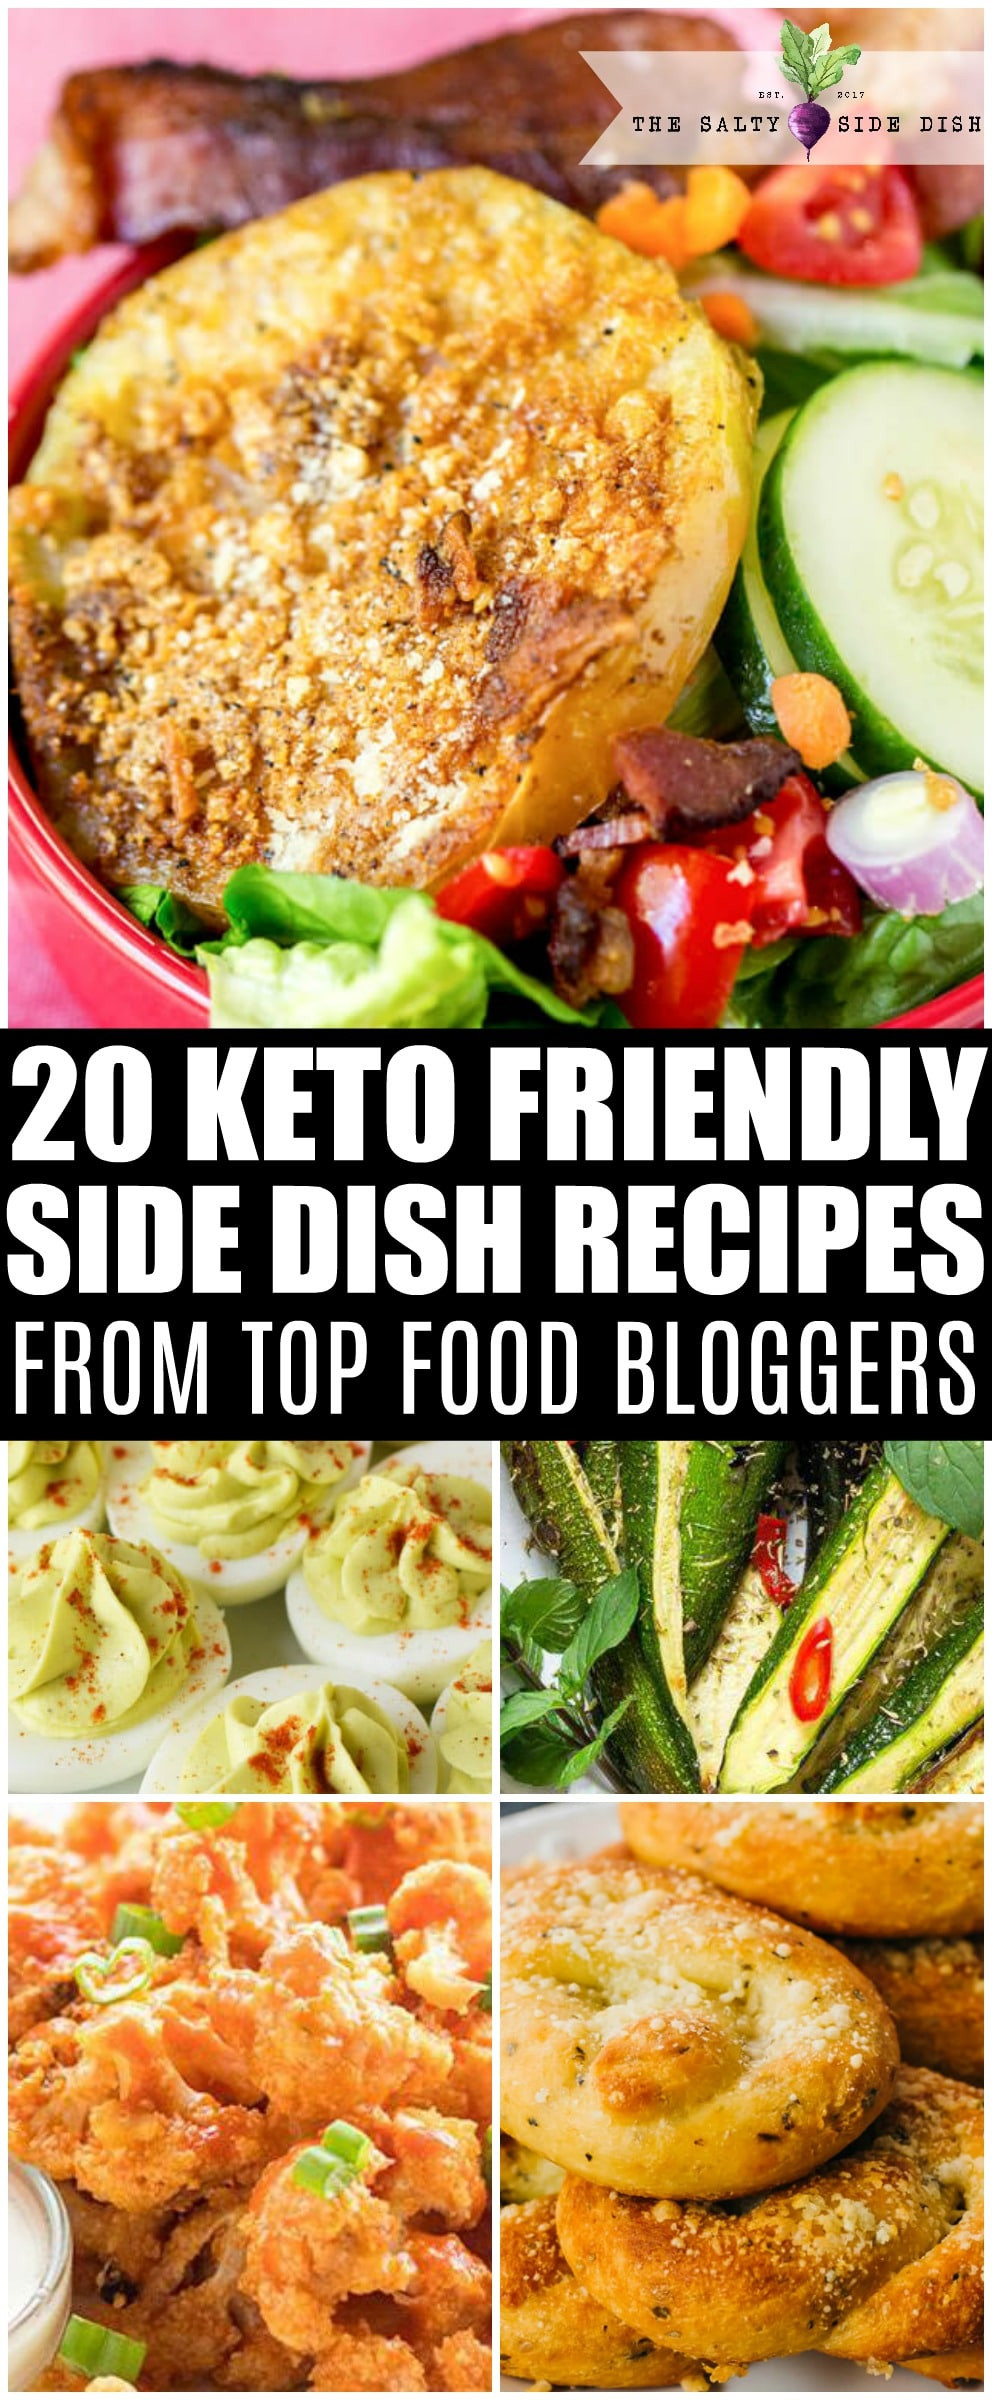 Low Carb Keto Sides
 20 Keto Side Dishes for Low Carb Menus